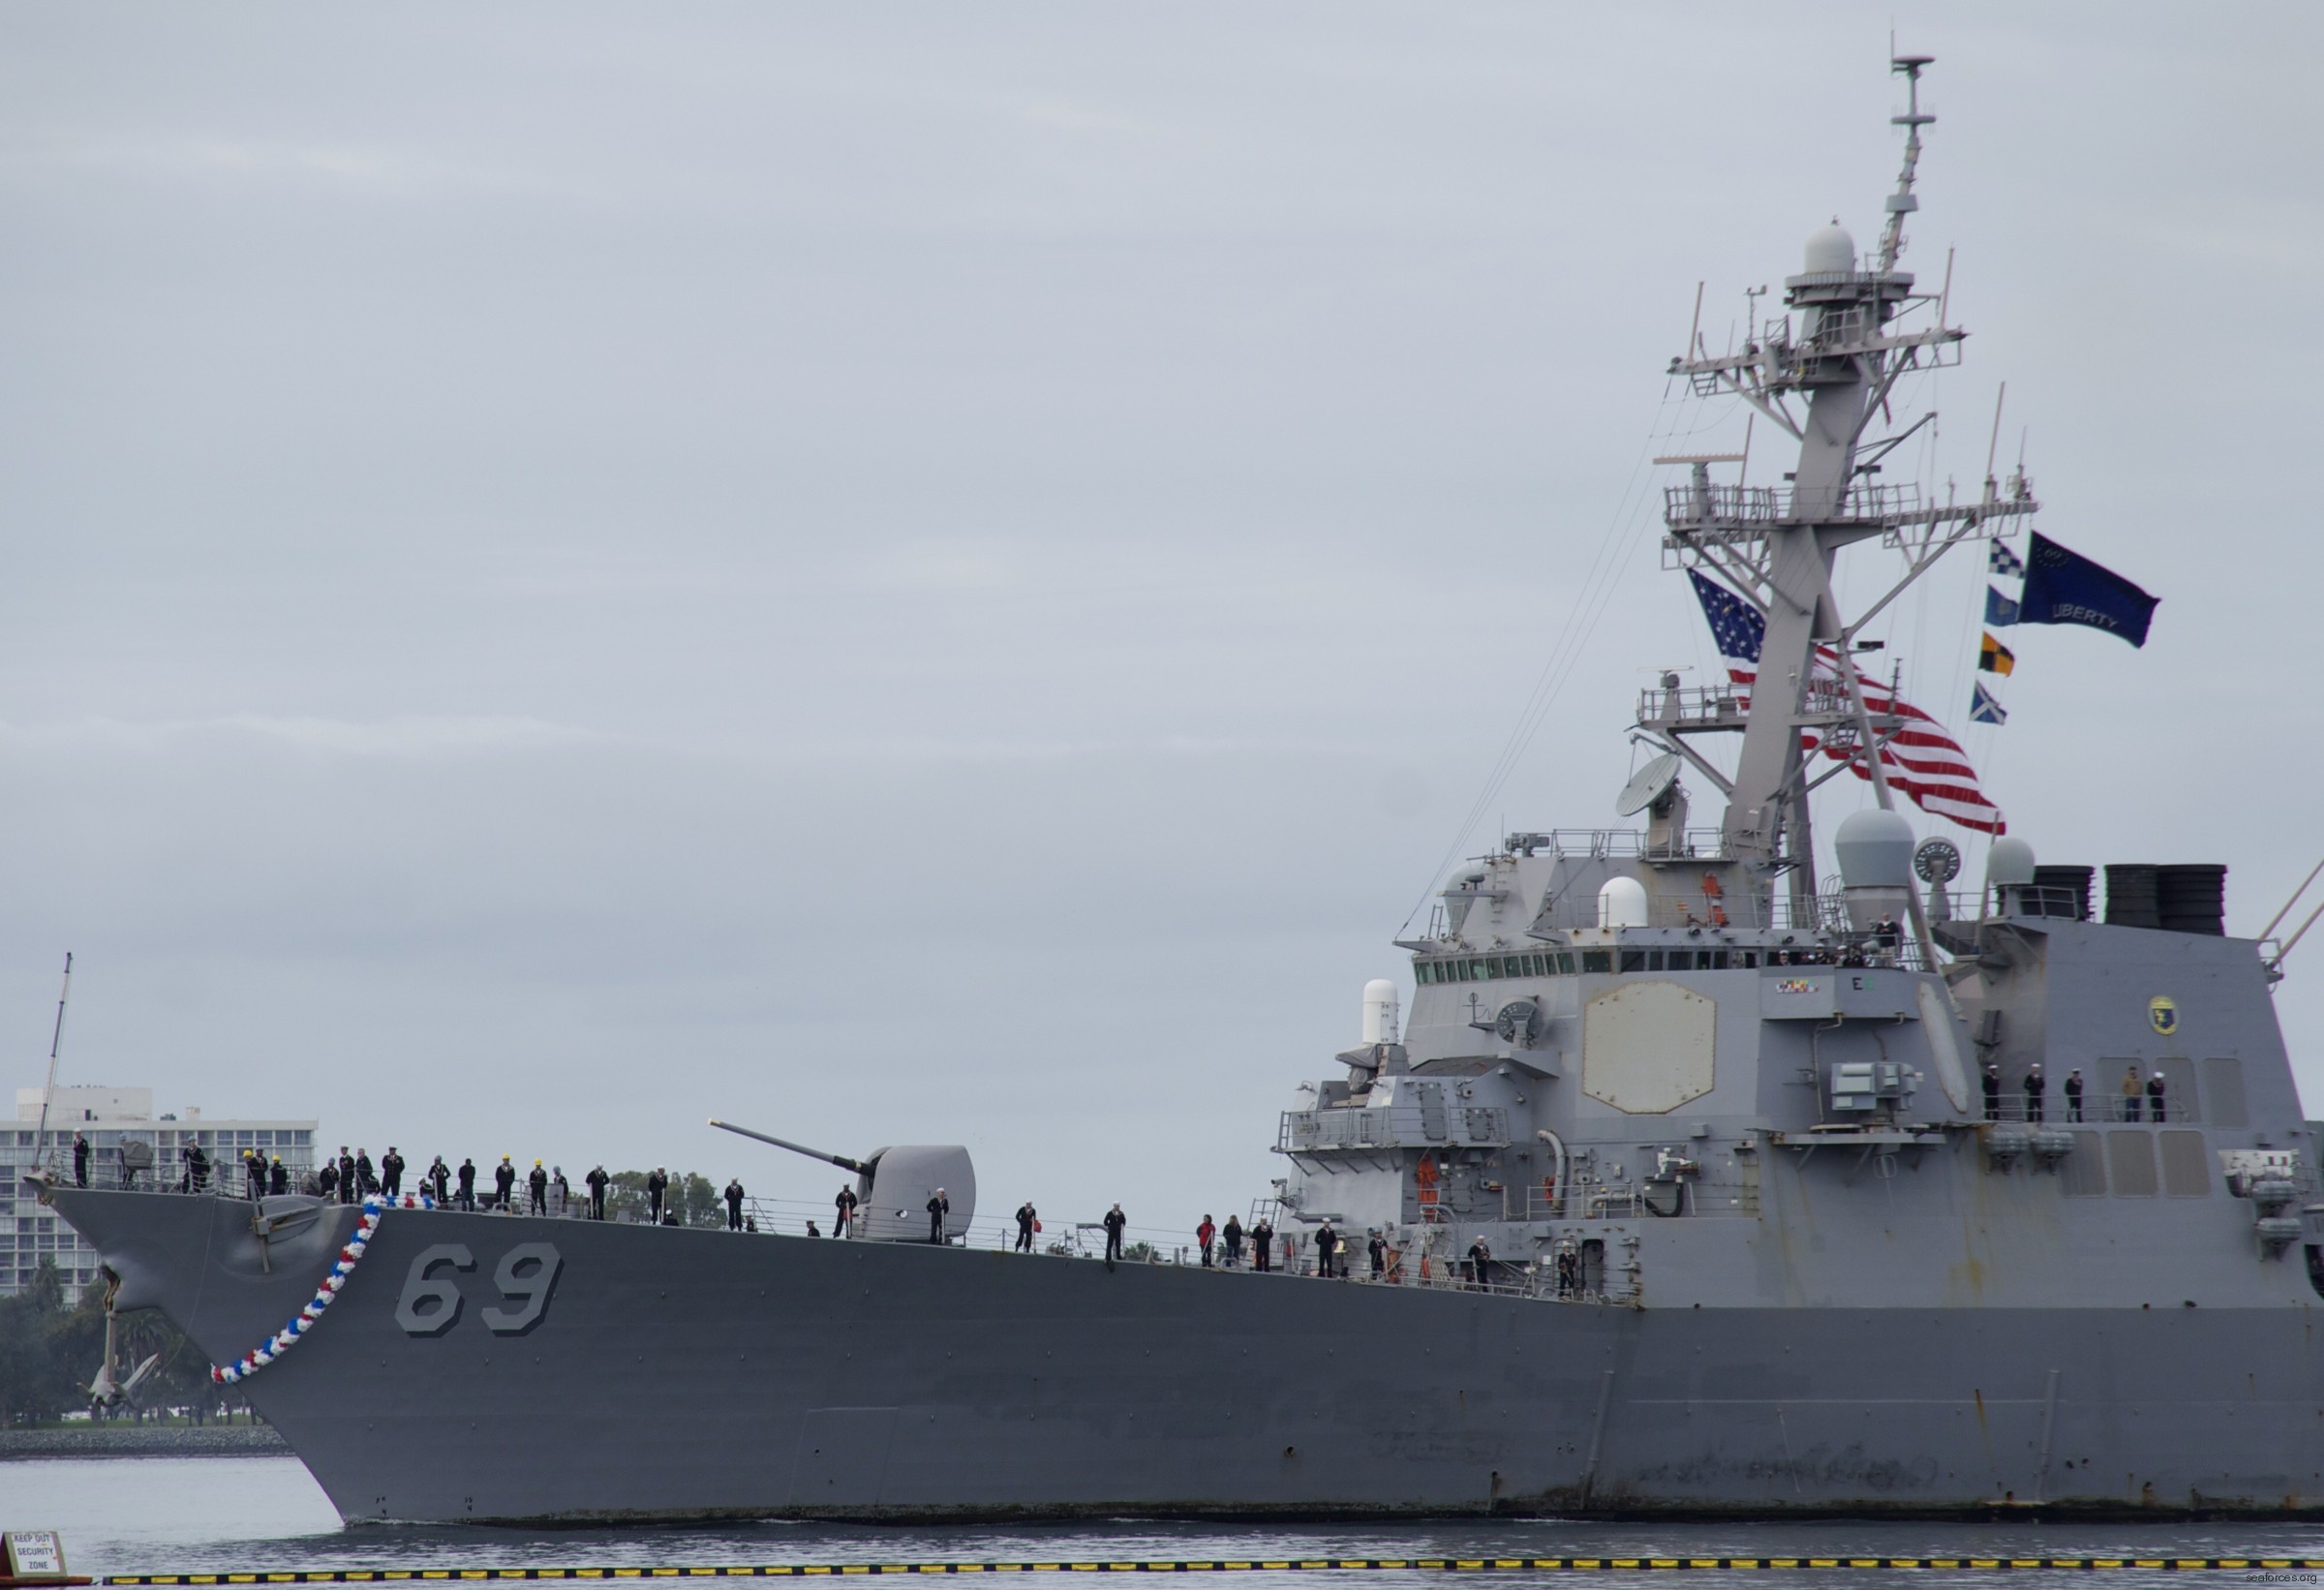 ddg-69 uss milius guided missile destroyer arleigh burke class aegis bmd 28